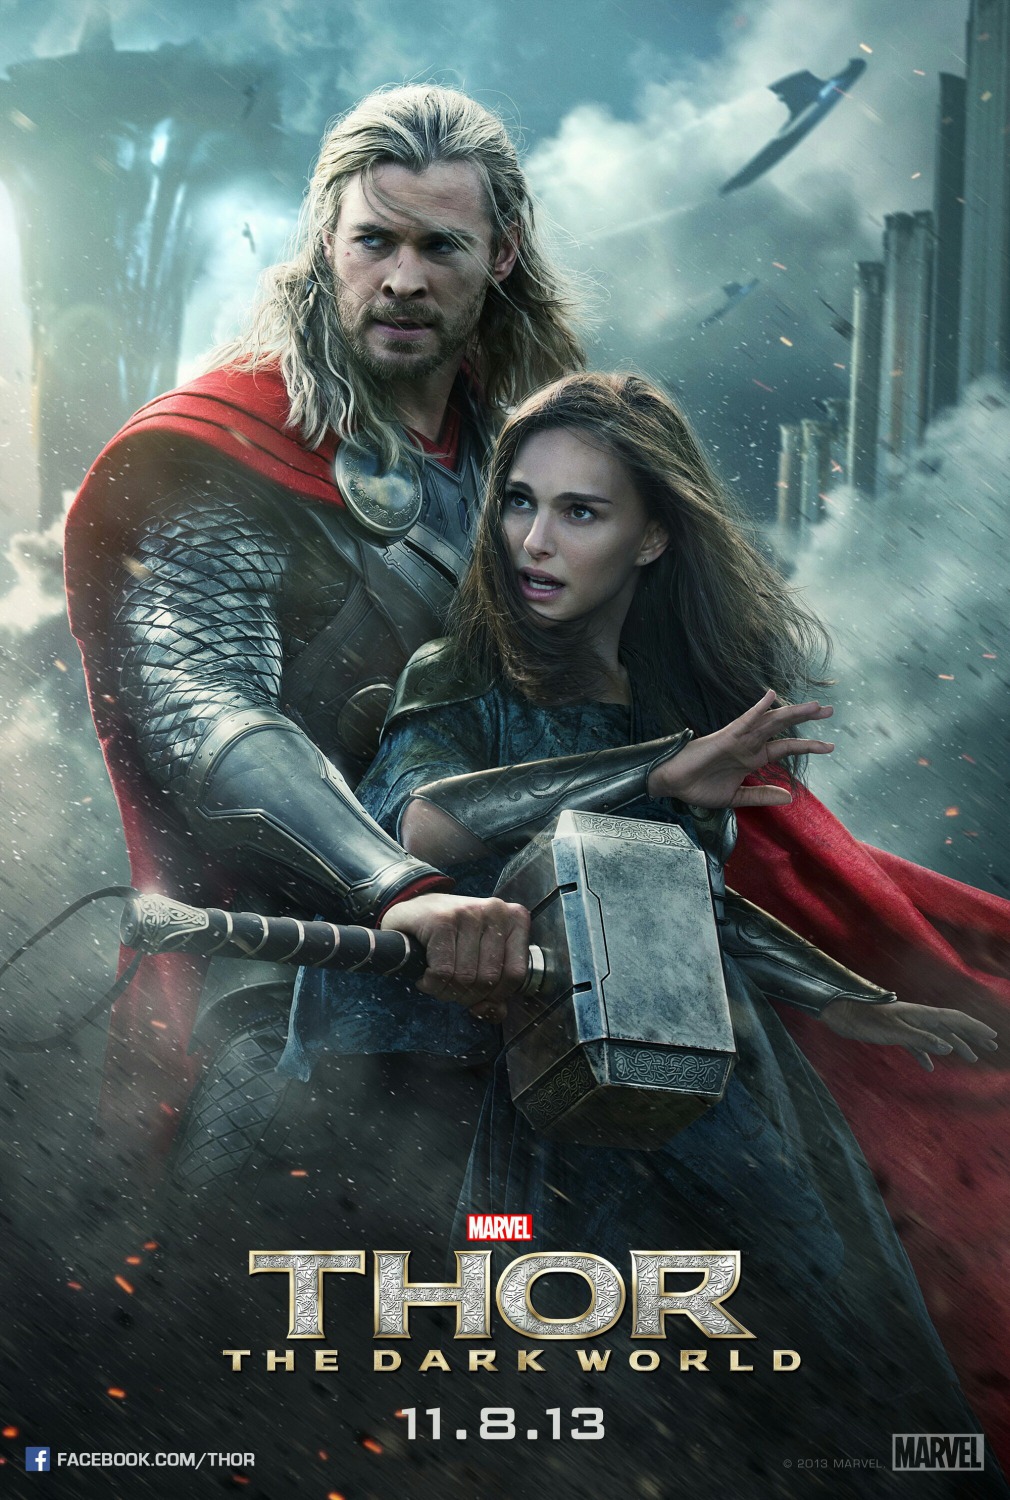 Extra Large Movie Poster Image for Thor: The Dark World (#5 of 19)